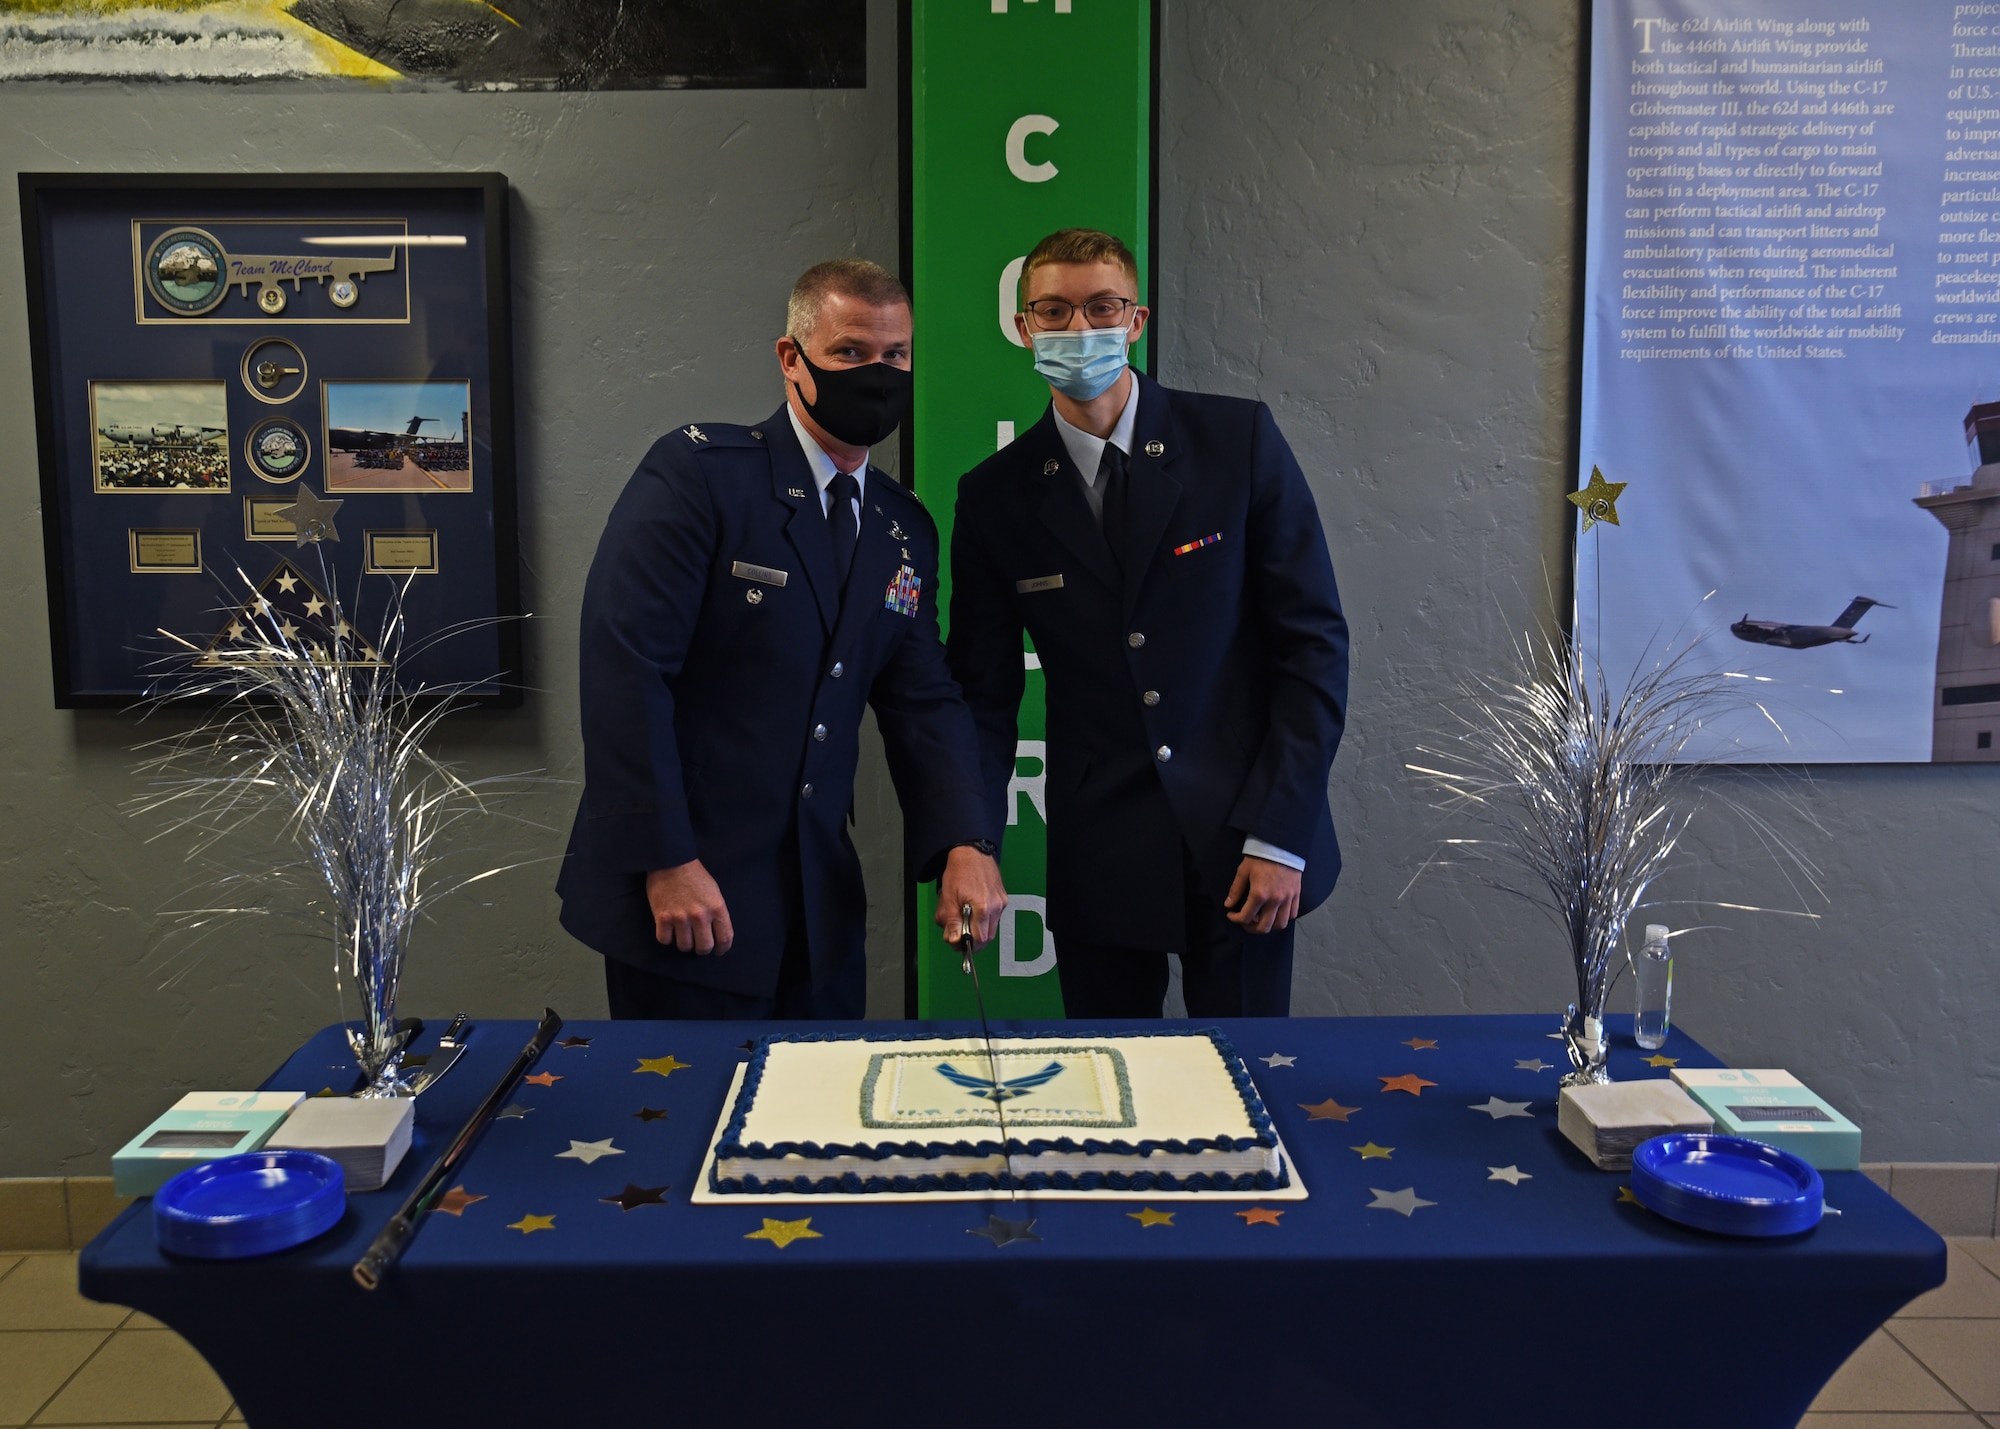 U.S. Air Force Col. Brian Collins, 62nd Airlift Wing vice commander, and Airman Basic Jacob Johns, cargo processor with the 62nd Aerial Port Squadron and youngest Airman with Team McChord, cut the cake as part of Air Force’s 74th birthday celebration at Joint Base Lewis-McChord, Washington, Sept. 16, 2021. The Air Force is celebrating 74 years of incredible history, hardworking Airmen and a dedication to the mission; to fly, fight, and win … airpower anytime, anywhere. (U.S. Air Force photo by Senior Airman Zoe Thacker)